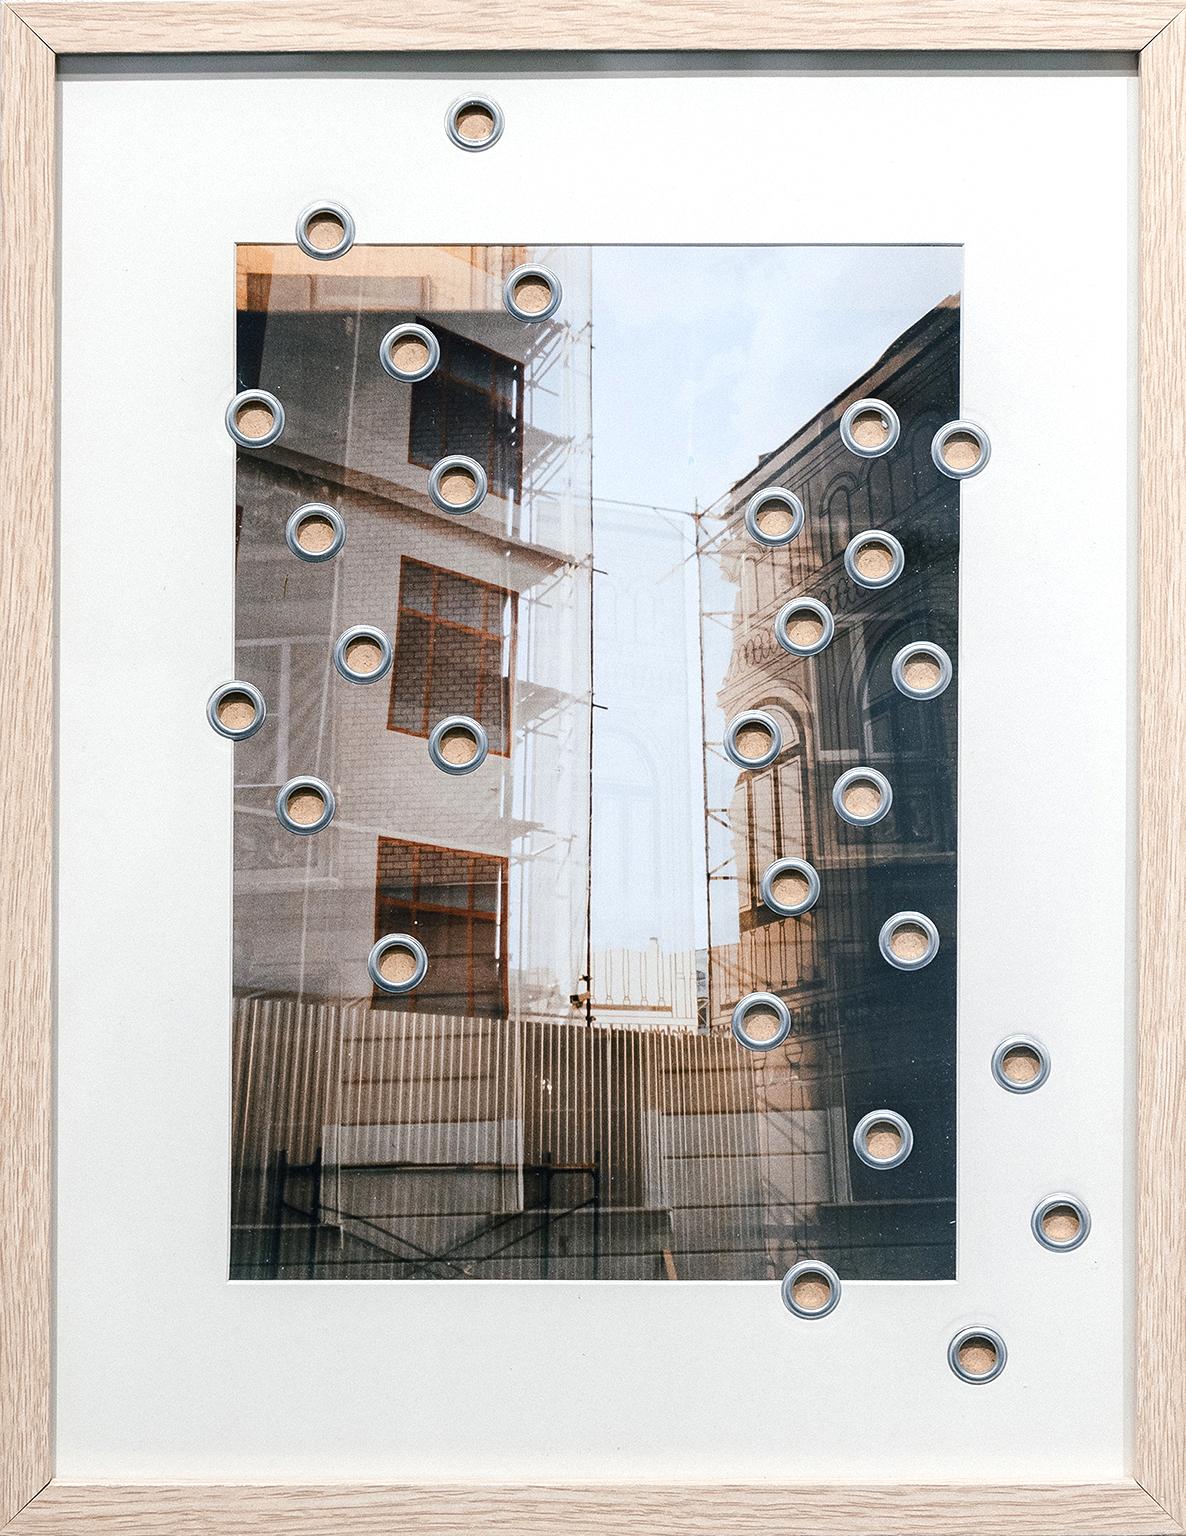 Igor Ponosov
Photo series "Between The Walls", 2021
Digital print from negative film, mat (picture framing), grommets, wooden frame
40 x 30 cm

Igor Ponosov (b. 1980) is a Moscow-based artist, curator and researcher, co-founder of the Partizaning